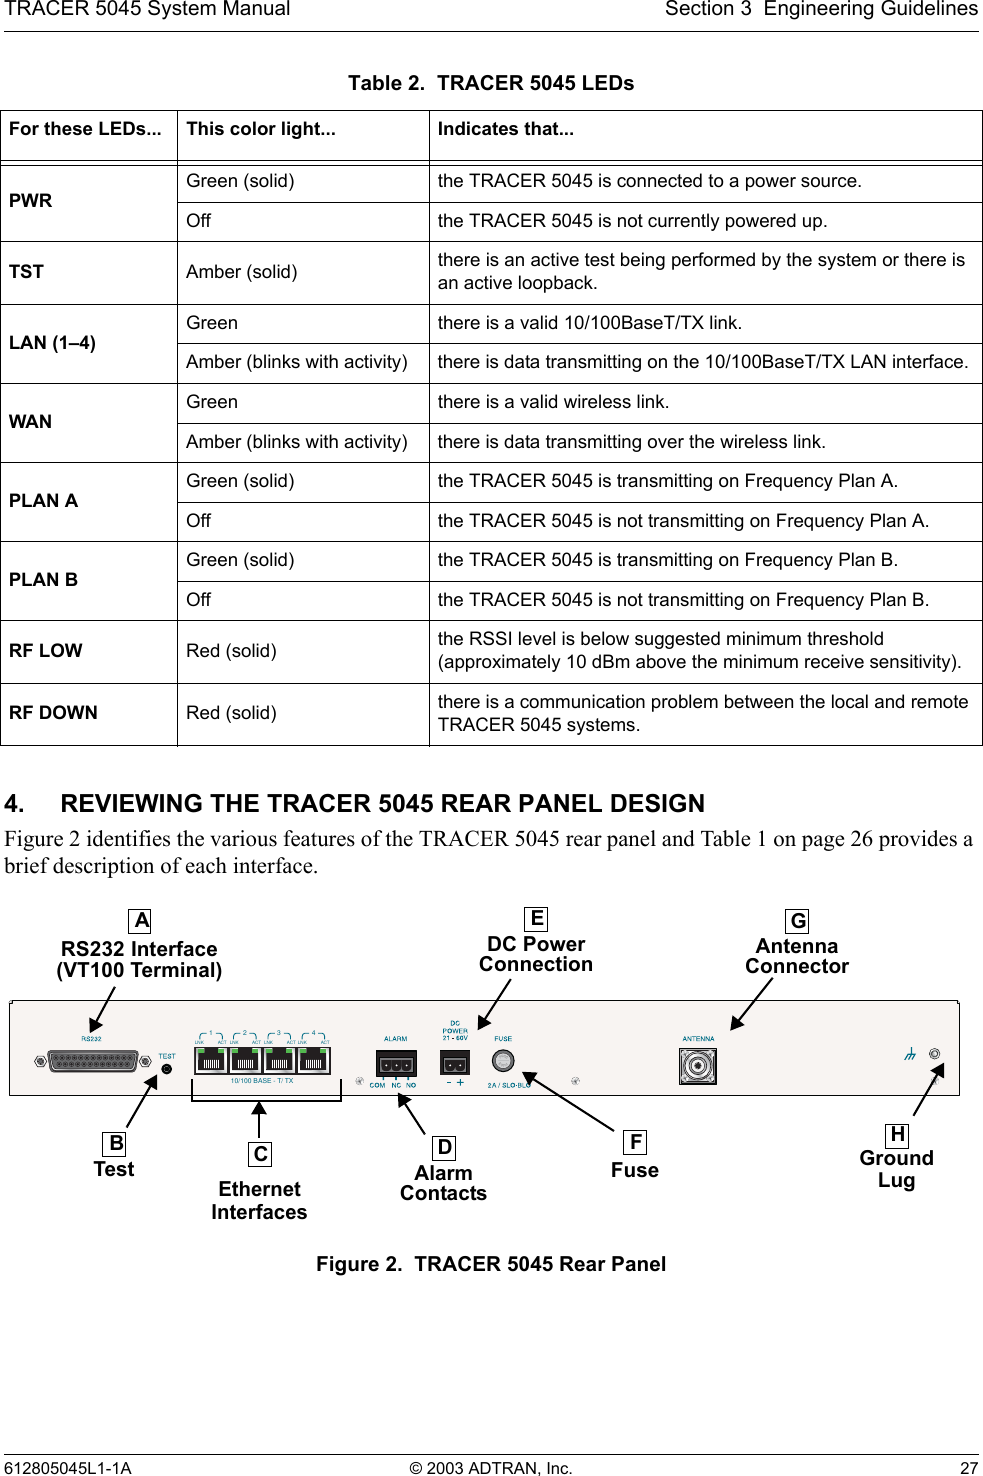 TRACER 5045 System Manual Section 3  Engineering Guidelines612805045L1-1A © 2003 ADTRAN, Inc. 274. REVIEWING THE TRACER 5045 REAR PANEL DESIGNFigure 2 identifies the various features of the TRACER 5045 rear panel and Table 1 on page 26 provides a brief description of each interface. Figure 2.  TRACER 5045 Rear PanelTable 2.  TRACER 5045 LEDsFor these LEDs... This color light... Indicates that...PWRGreen (solid) the TRACER 5045 is connected to a power source.Off the TRACER 5045 is not currently powered up.TST Amber (solid) there is an active test being performed by the system or there is an active loopback.LAN (1–4)Green  there is a valid 10/100BaseT/TX link.Amber (blinks with activity) there is data transmitting on the 10/100BaseT/TX LAN interface.WANGreen there is a valid wireless link. Amber (blinks with activity) there is data transmitting over the wireless link.PLAN AGreen (solid) the TRACER 5045 is transmitting on Frequency Plan A.Off the TRACER 5045 is not transmitting on Frequency Plan A.PLAN BGreen (solid) the TRACER 5045 is transmitting on Frequency Plan B.Off the TRACER 5045 is not transmitting on Frequency Plan B.RF LOW Red (solid) the RSSI level is below suggested minimum threshold (approximately 10 dBm above the minimum receive sensitivity).RF DOWN Red (solid) there is a communication problem between the local and remote TRACER 5045 systems.LNK ACT LNK ACT LNK ACT LNK ACT1210/100 BASE - T/ TX34AAntennaDC PowerConnection ConnectorRS232 Interface(VT100 Terminal)GroundLugFuseAlarmContactsTestEGBCDFHEthernetInterfaces